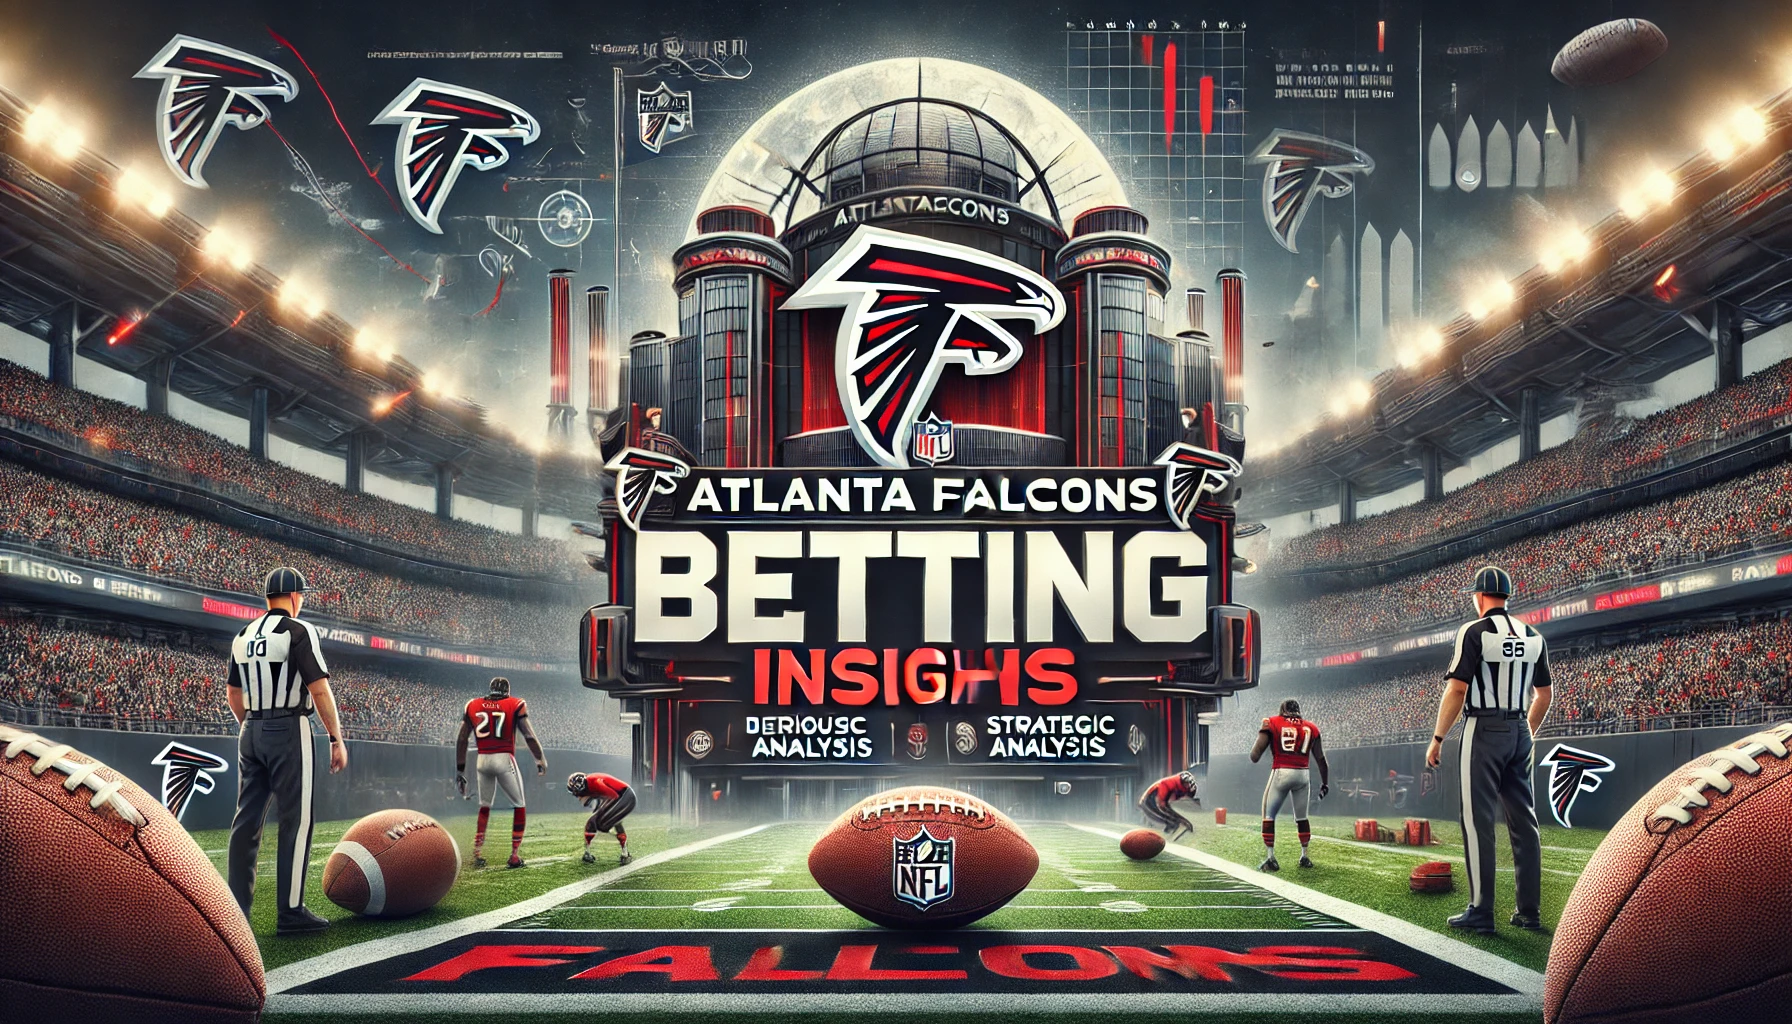 Analyzing the Atlanta Falcons' Home Performance for NFL Bettors